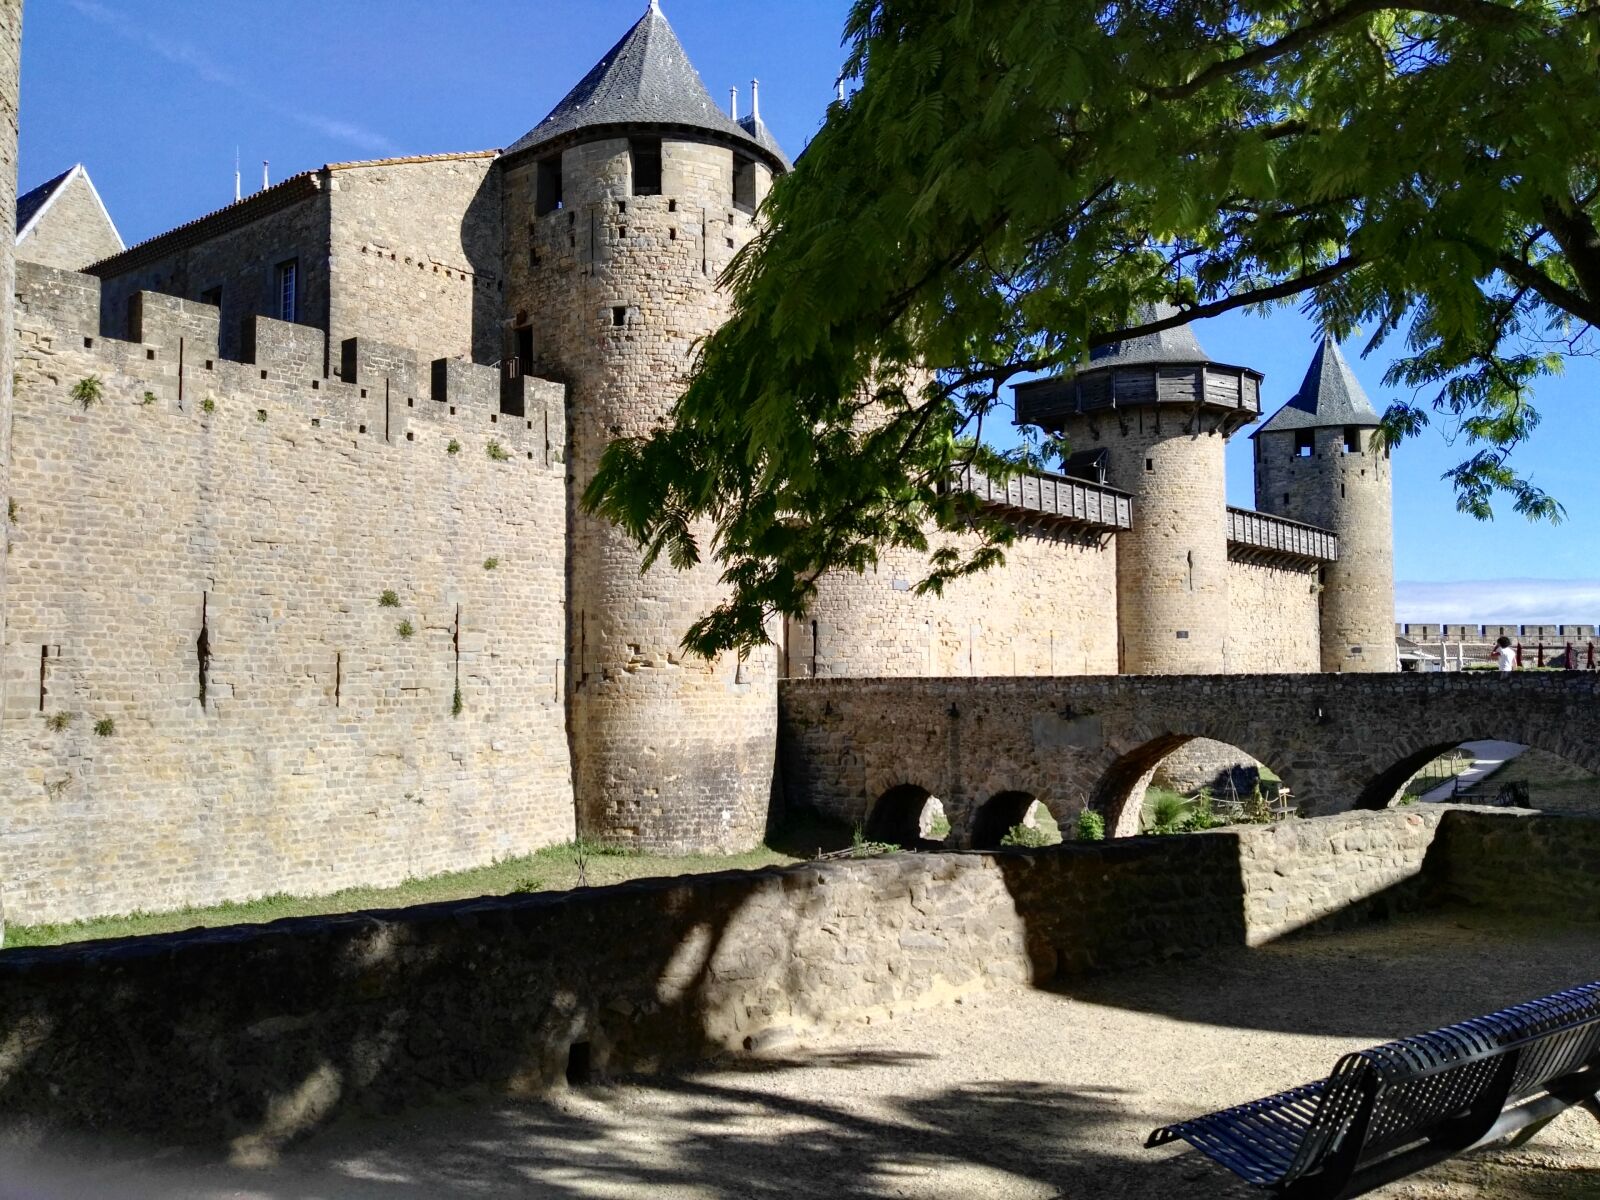 HUAWEI GX8 sample photo. Carcassonne, medieval city, ancient photography